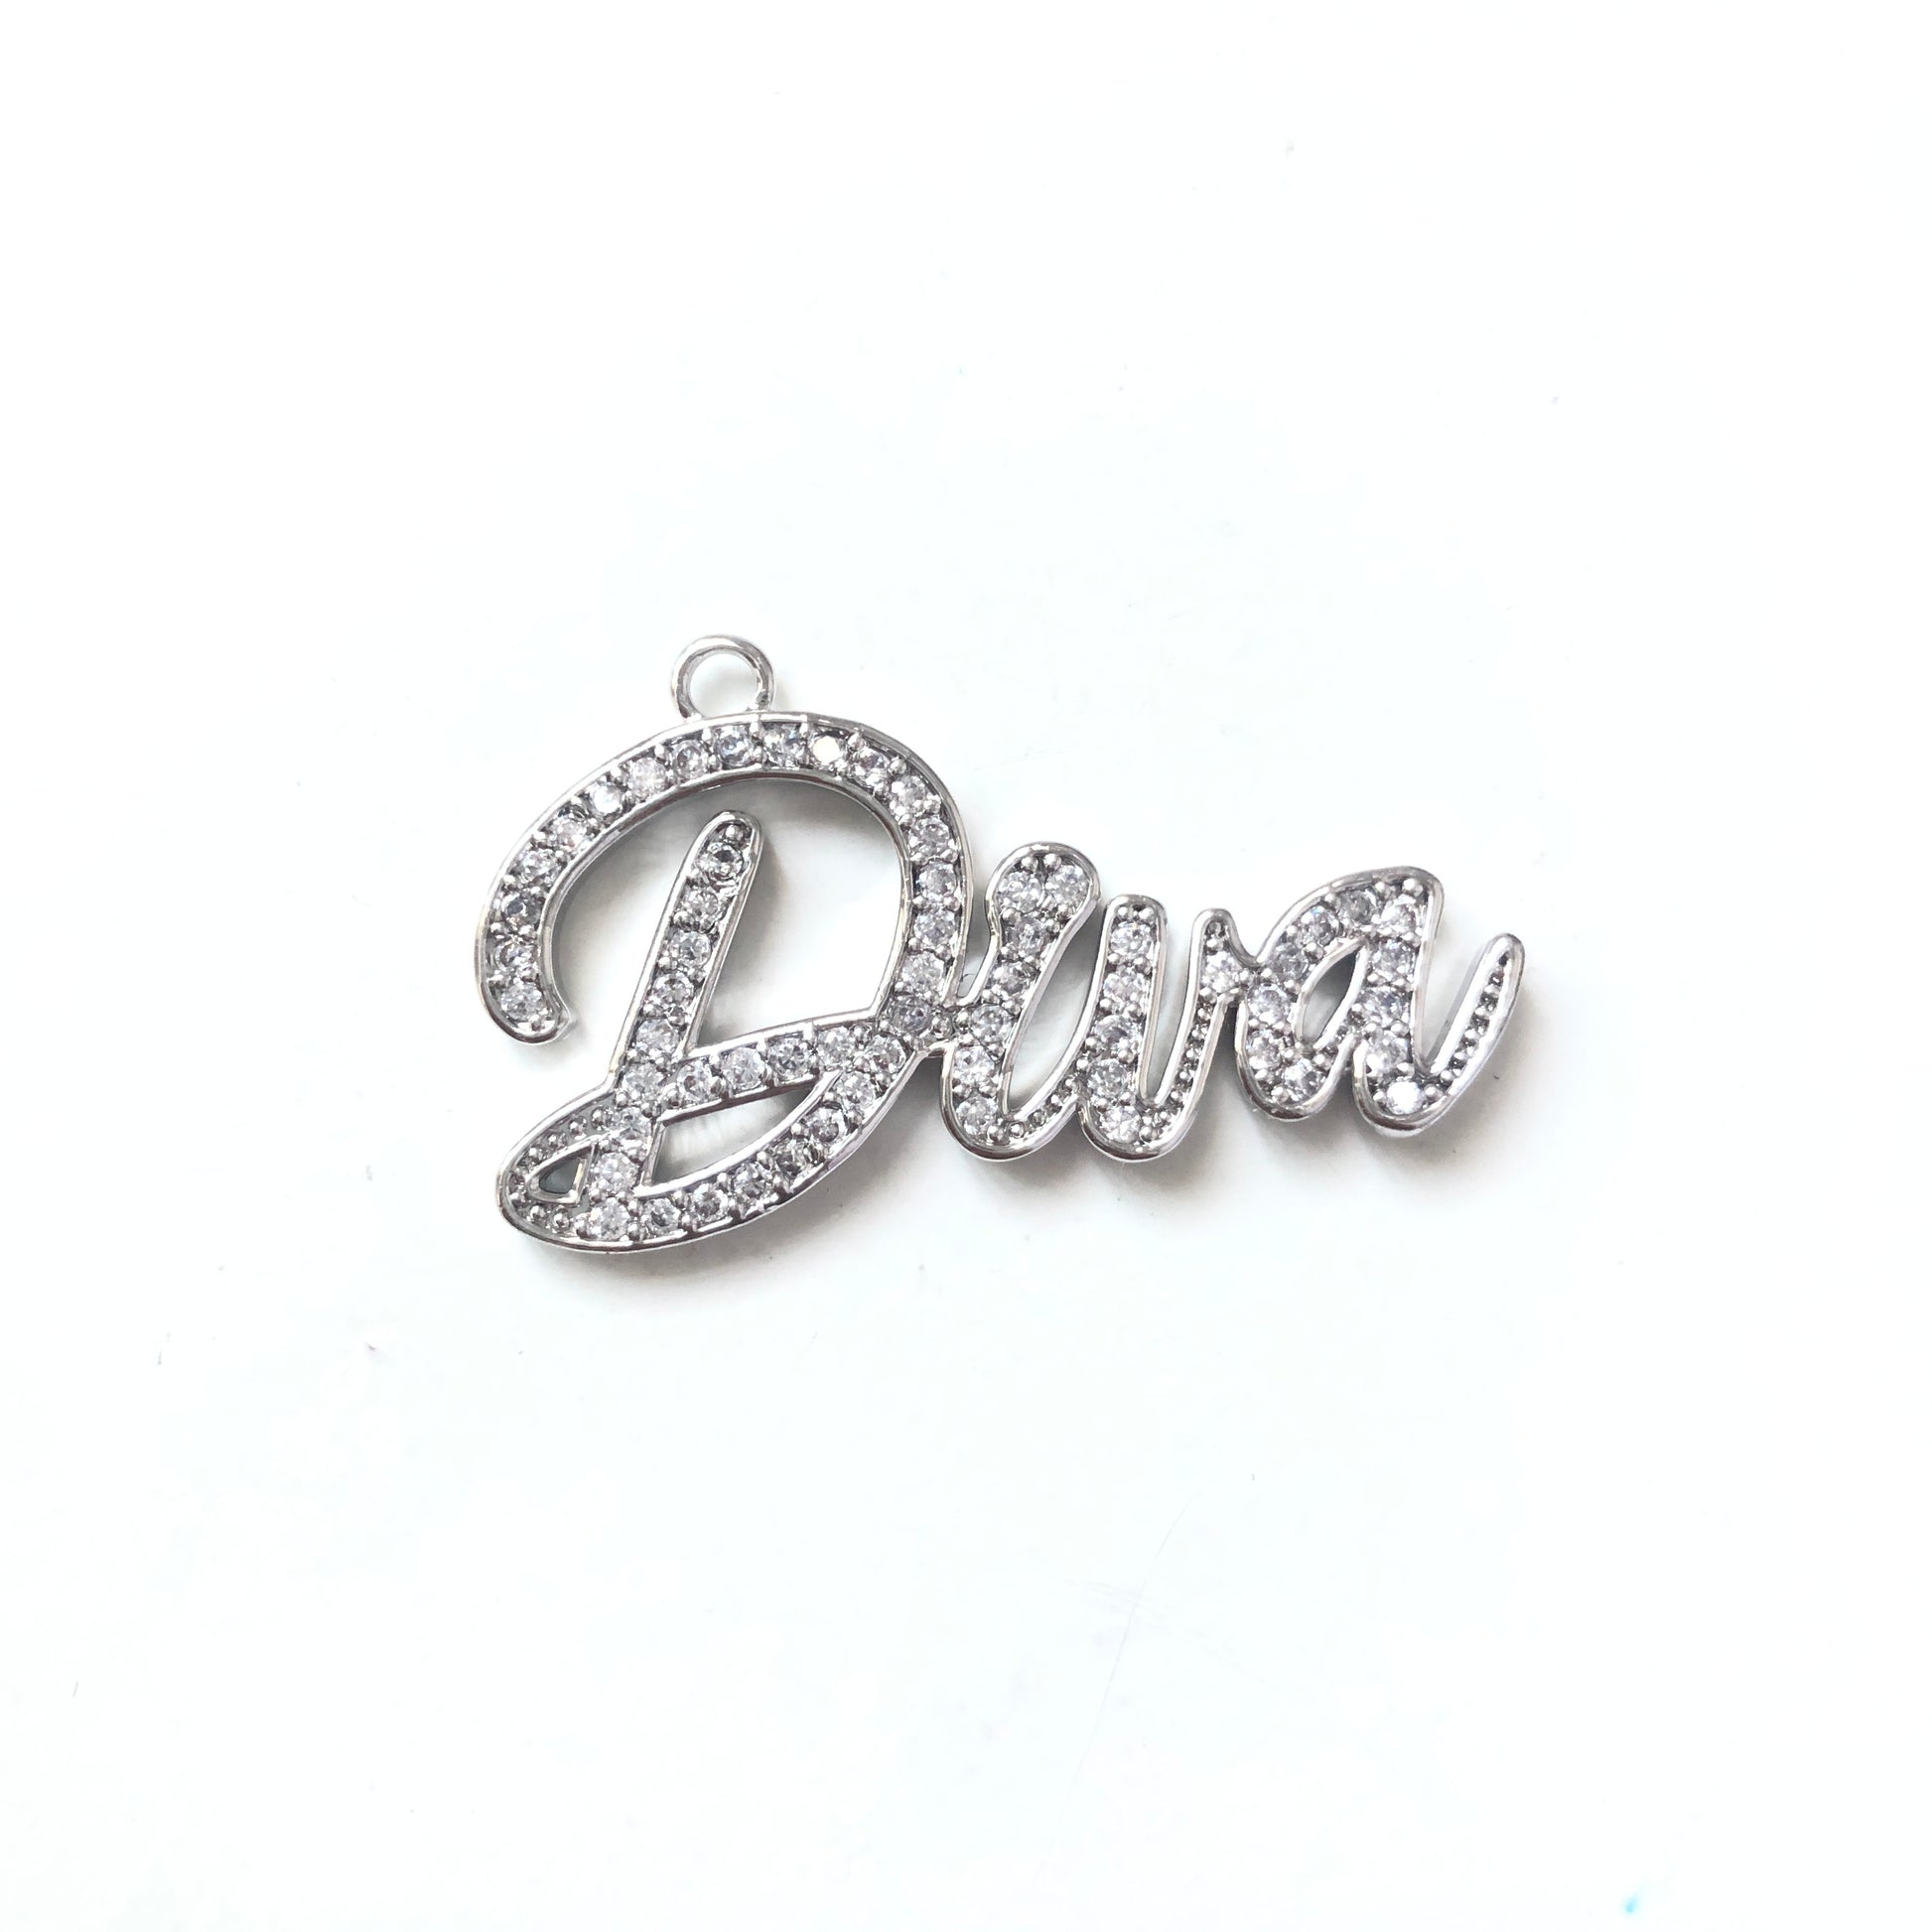 10pcs/lot 39*19mm CZ Paved DIVA Charms Silver CZ Paved Charms Words & Quotes Charms Beads Beyond